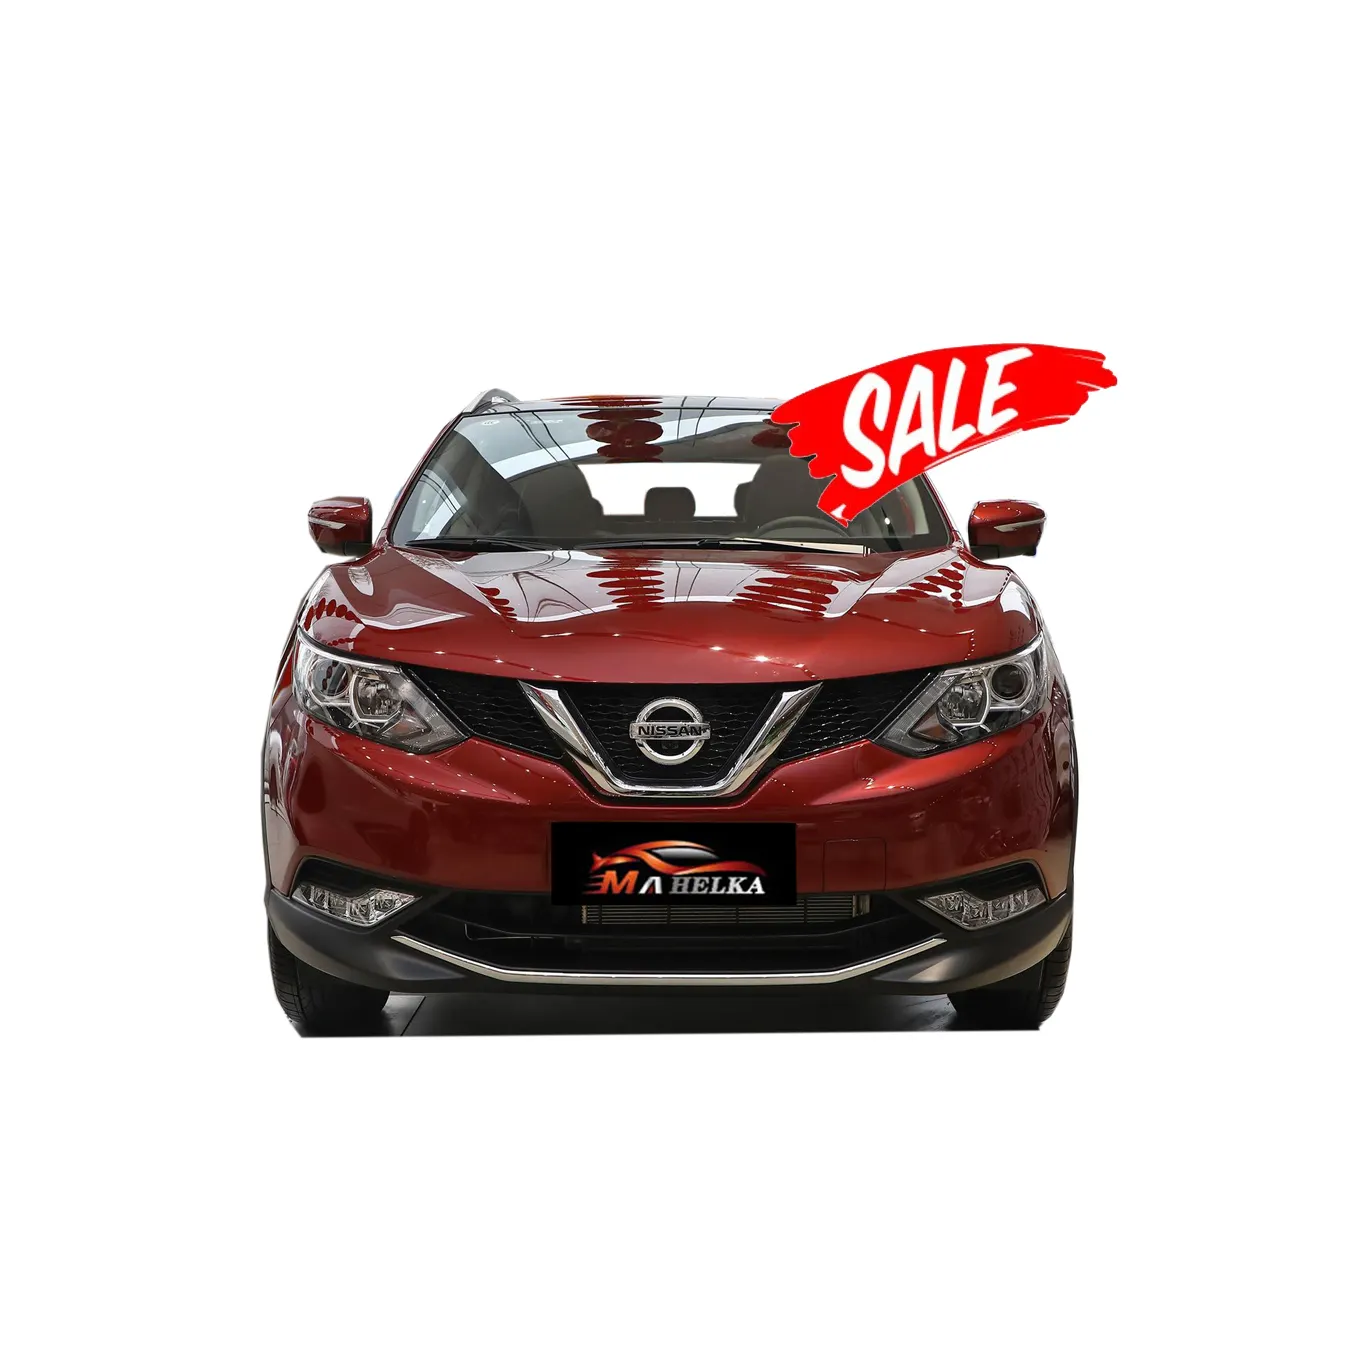 Stock Nissan Qashqai Over 3 New Inventions In Genesis Auto Usate Useds To China Car With Wholesale Price